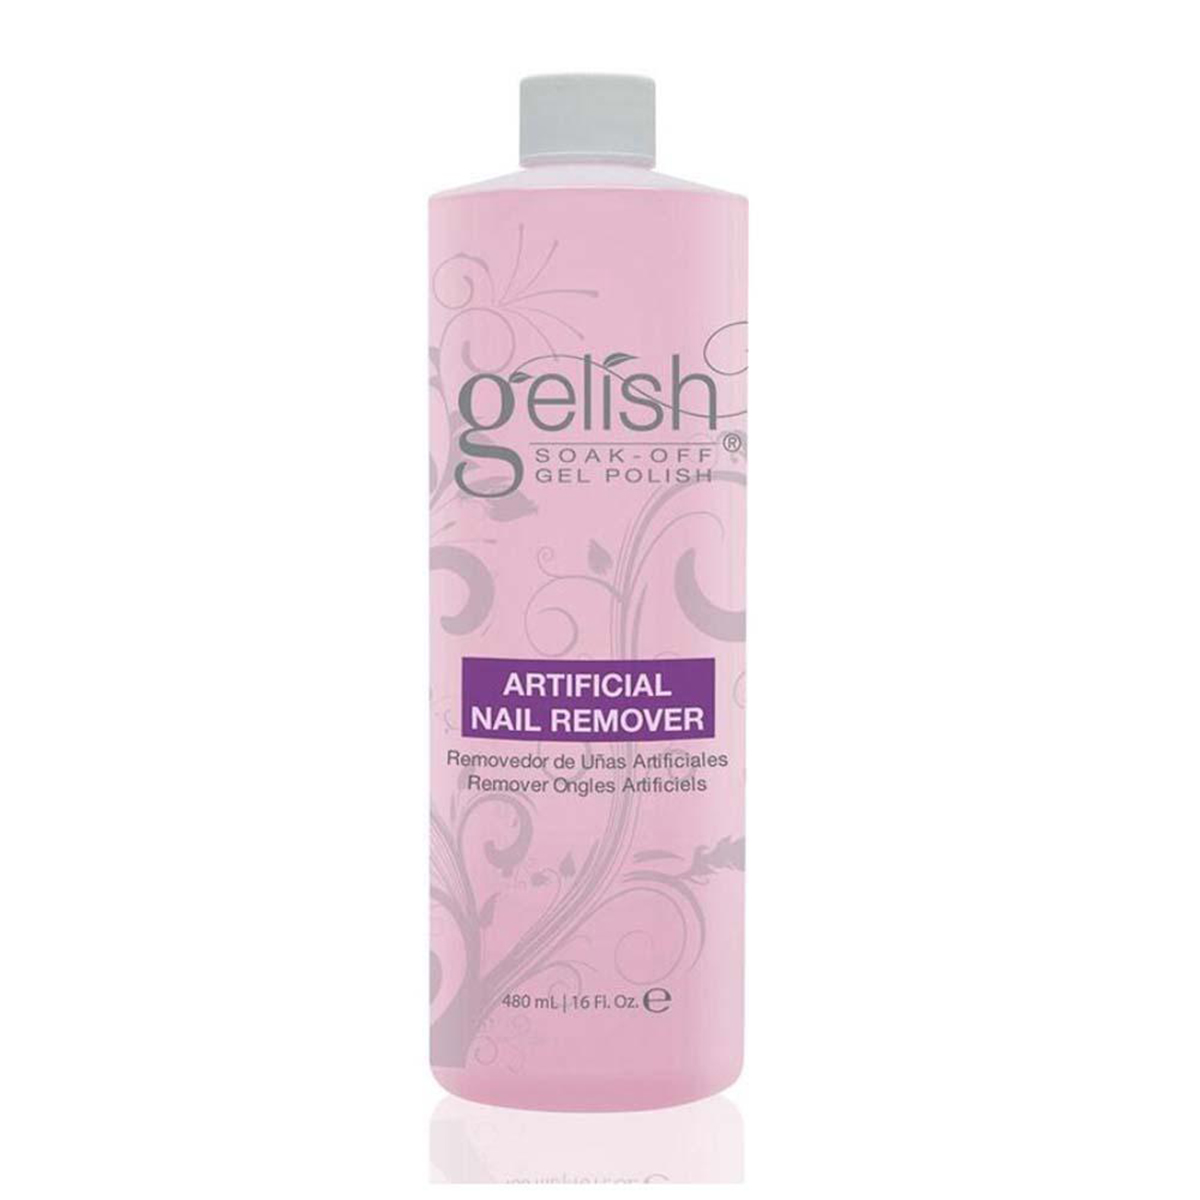 Purple bottle of Gelish Artificial Nail Remover 